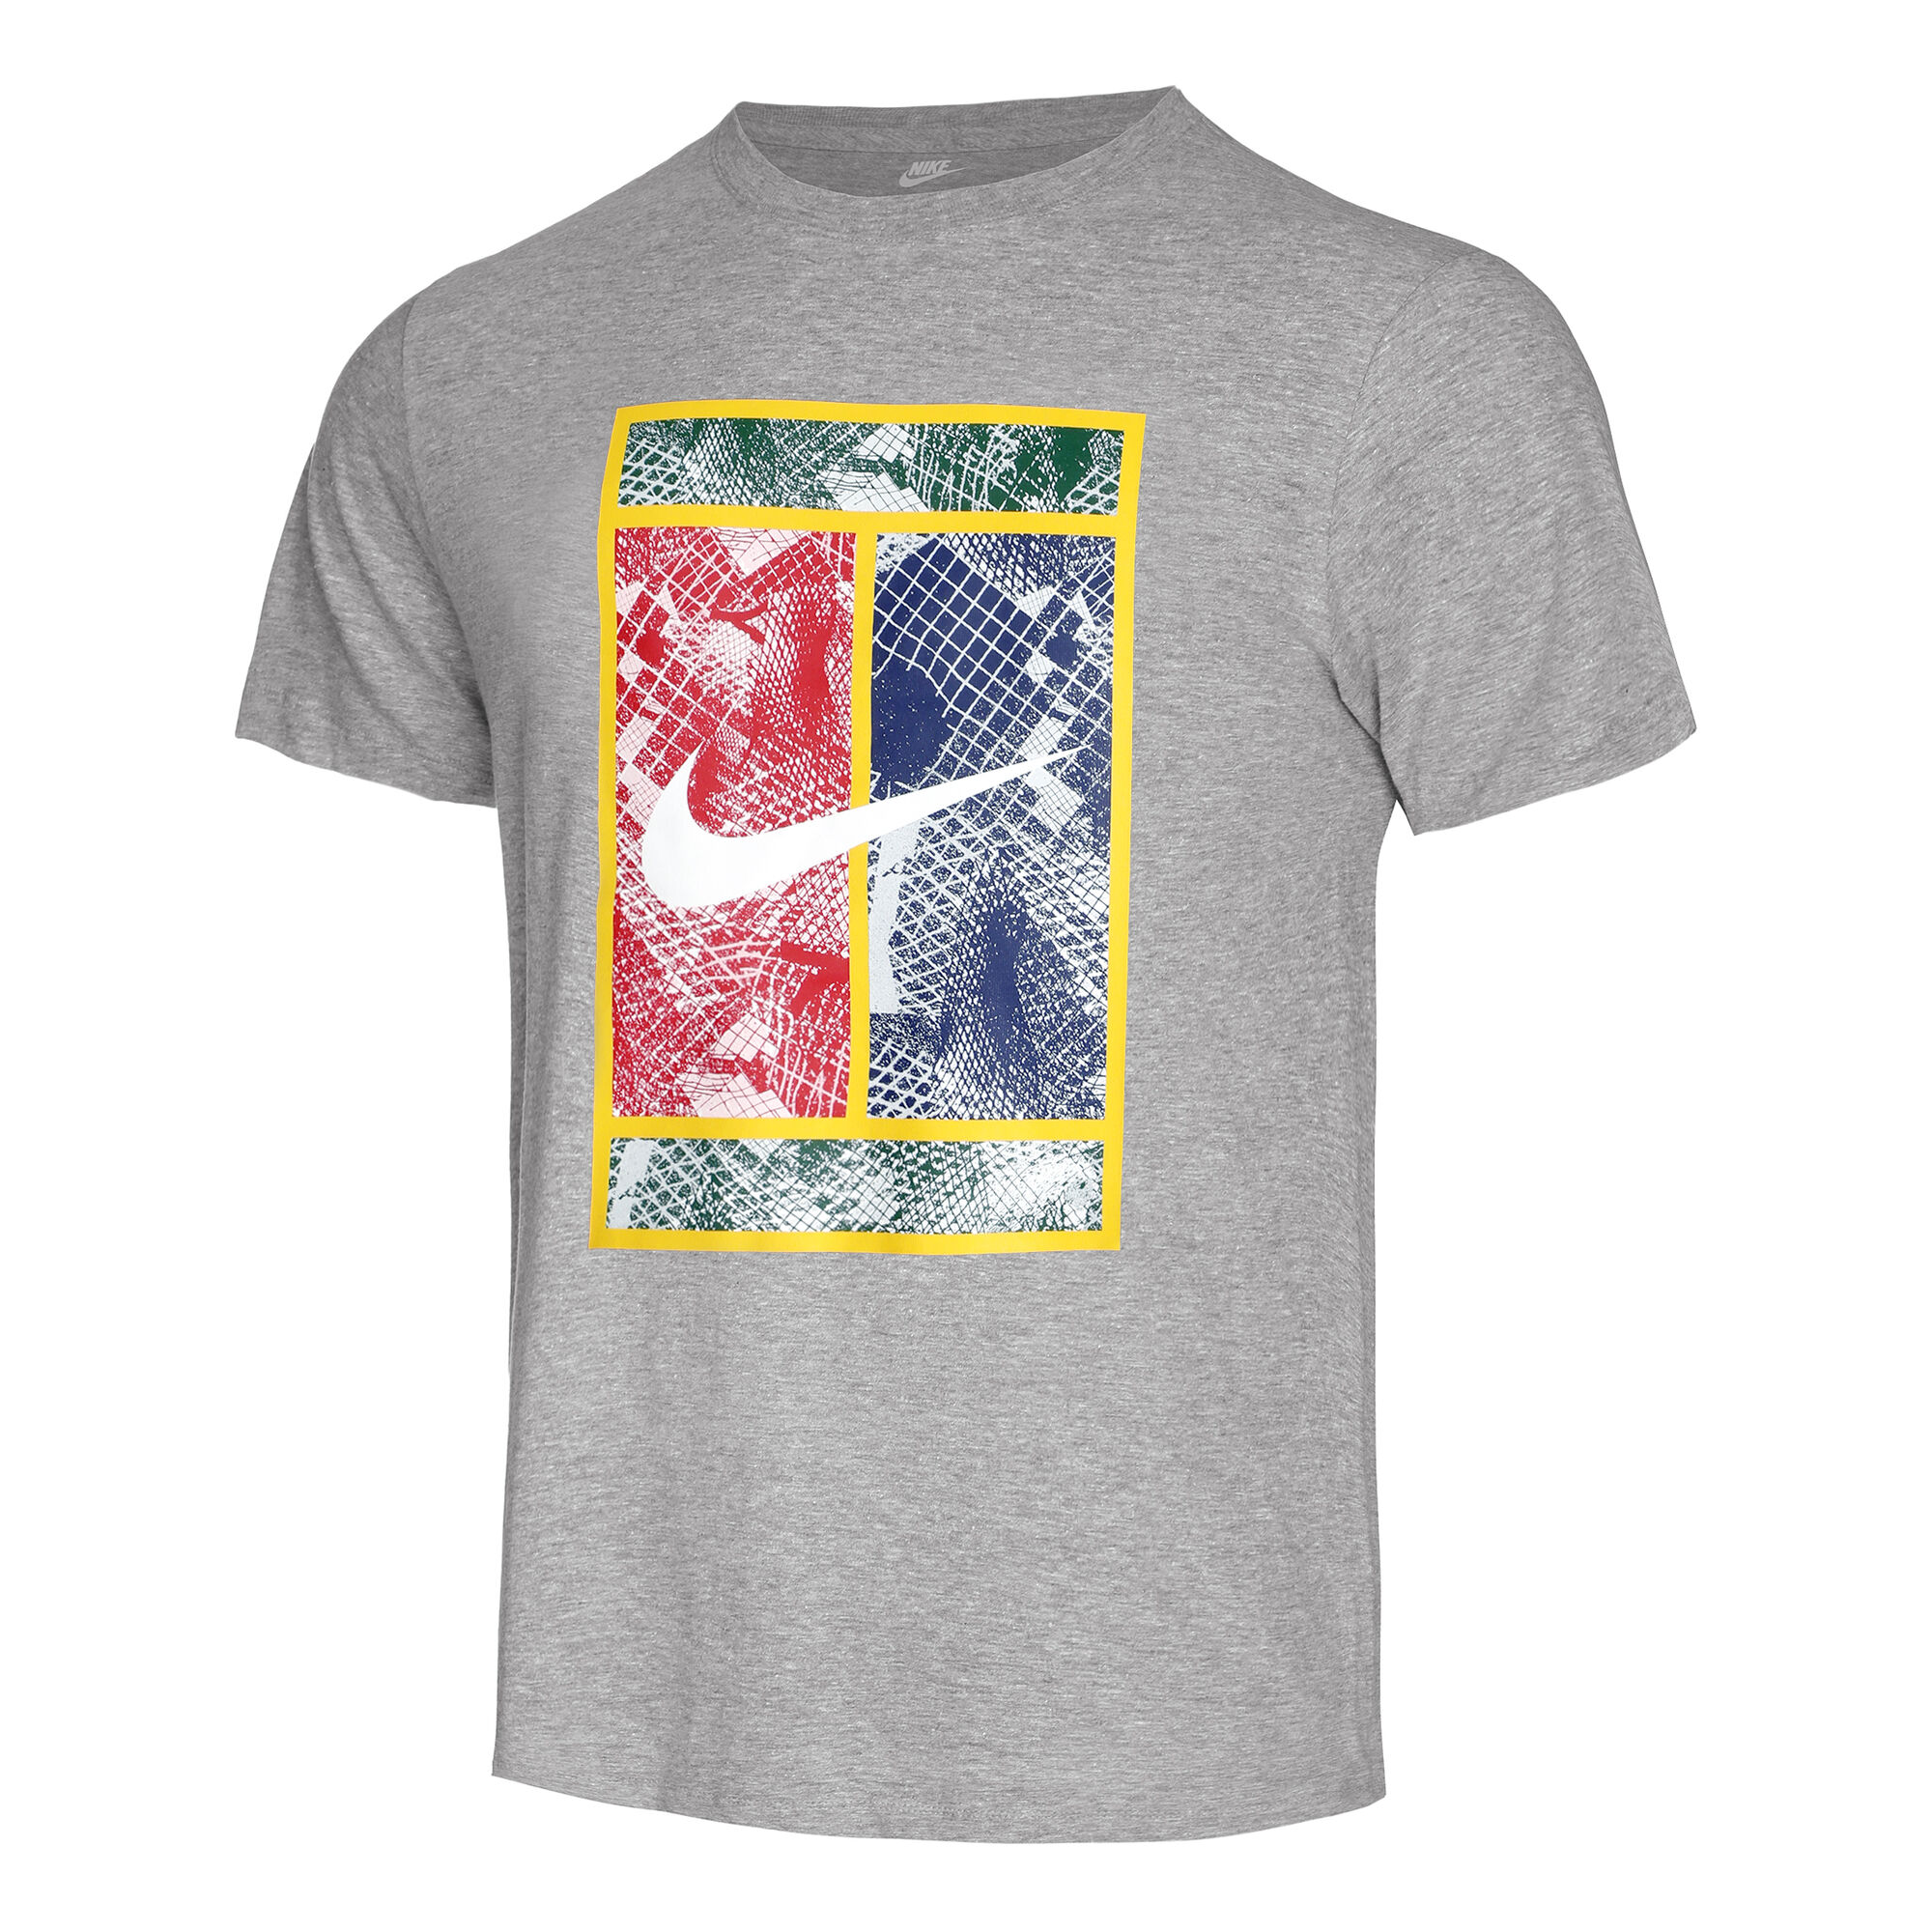 Nike Court Heritage T-Shirt - Grey, Multicoloured online | Tennis -Point